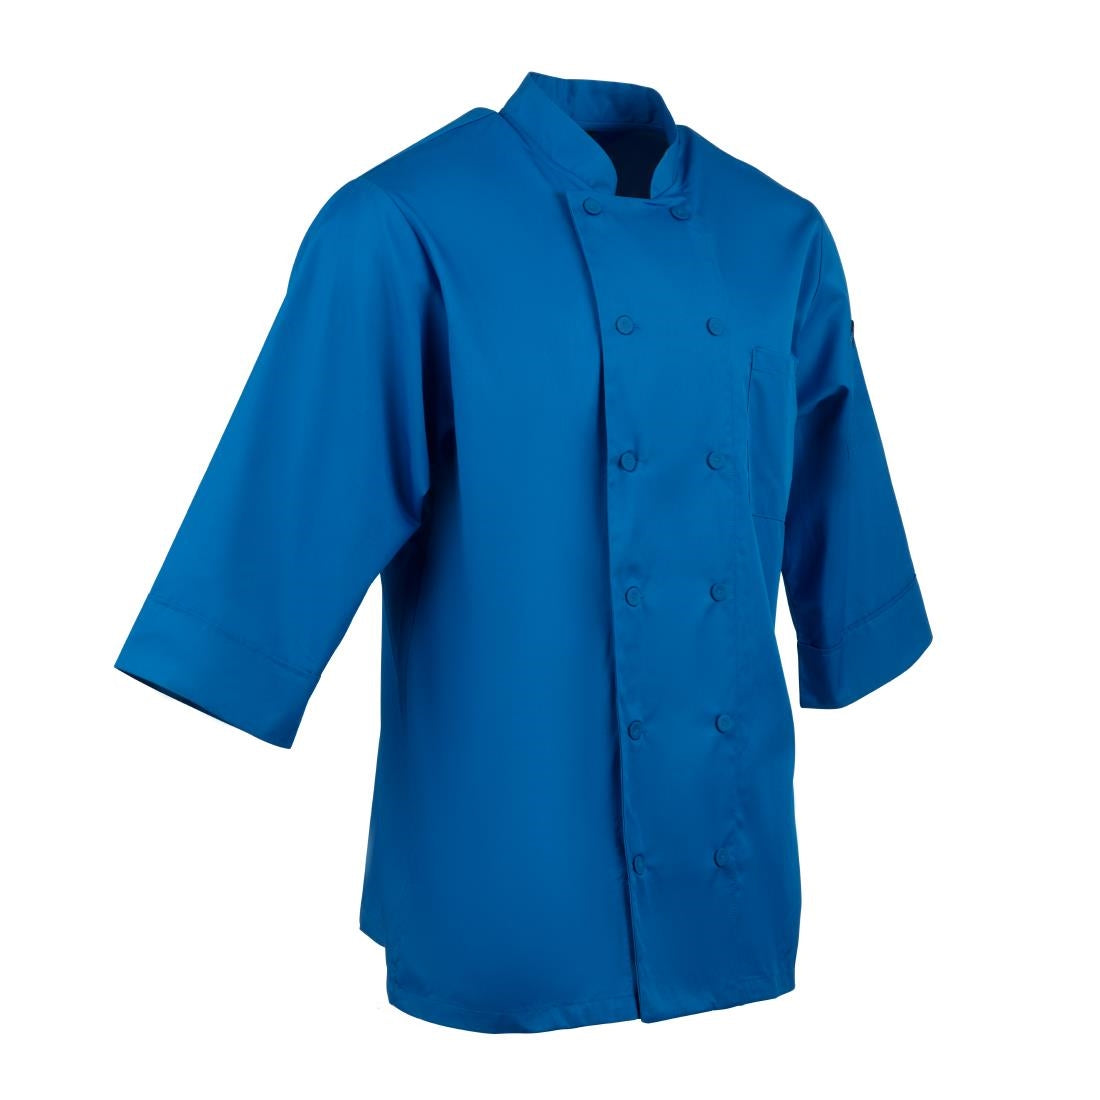 B178-XS Chef Works Unisex Chefs Jacket Blue XS JD Catering Equipment Solutions Ltd